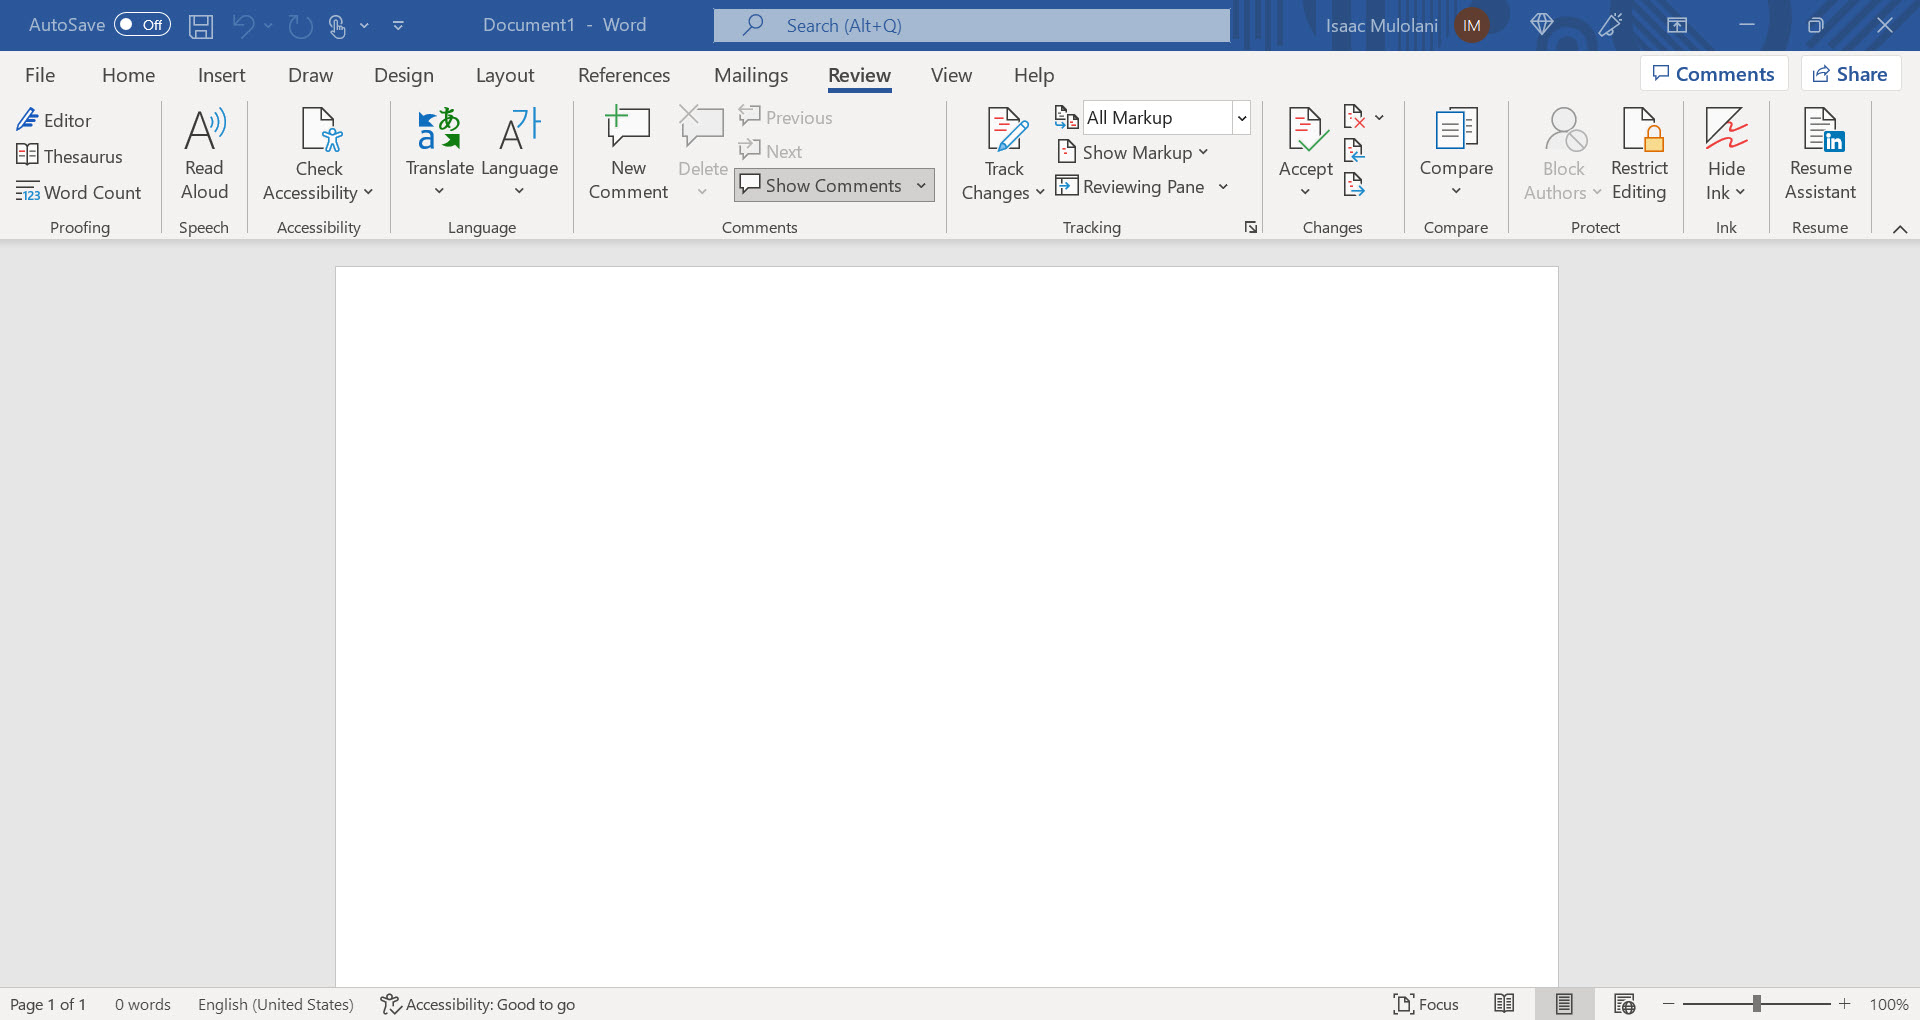 Another blank Microsoft Word document open in the editor focussing on the Review menu item.